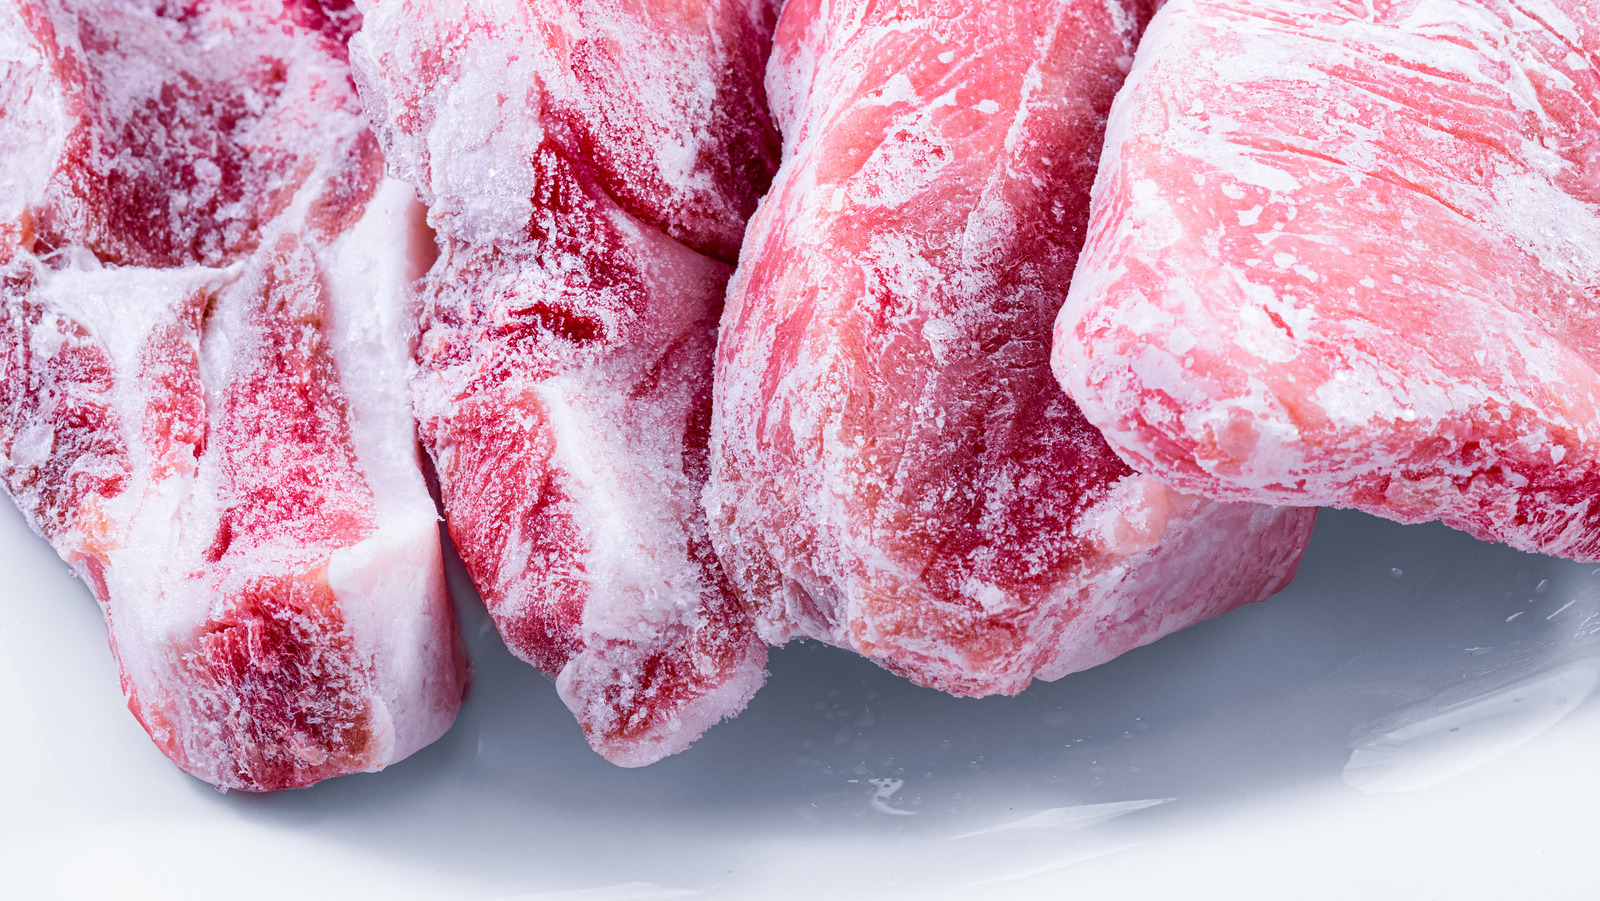 https://www.thedailymeal.com/img/gallery/the-trick-to-tenderizing-meat-after-its-been-frozen/l-intro-1689623712.jpg